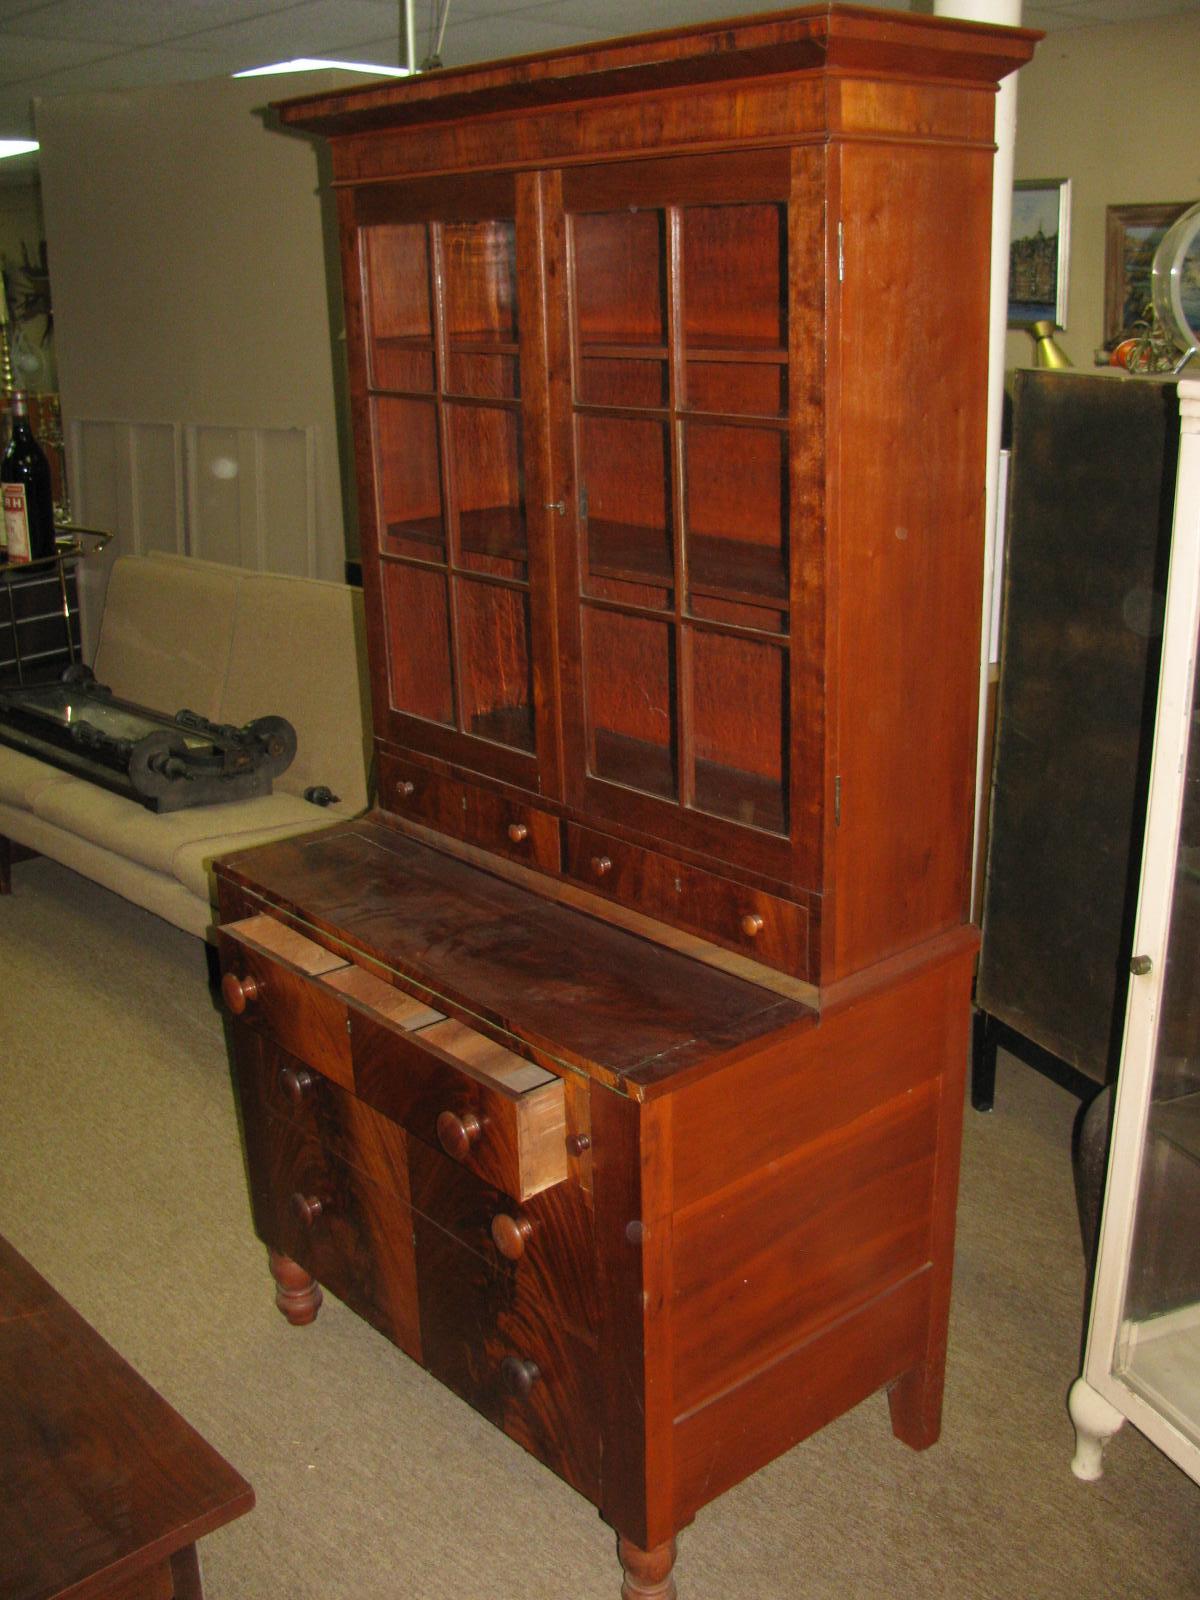 Period 1850 American Empire secretary desk in flame mahogany. Two-door bookcase, two small drawers below with orig key and lockset sits on base which consists of a desk which opens out to 32in., below the desk is 3 drawers with orig. pulls. All in